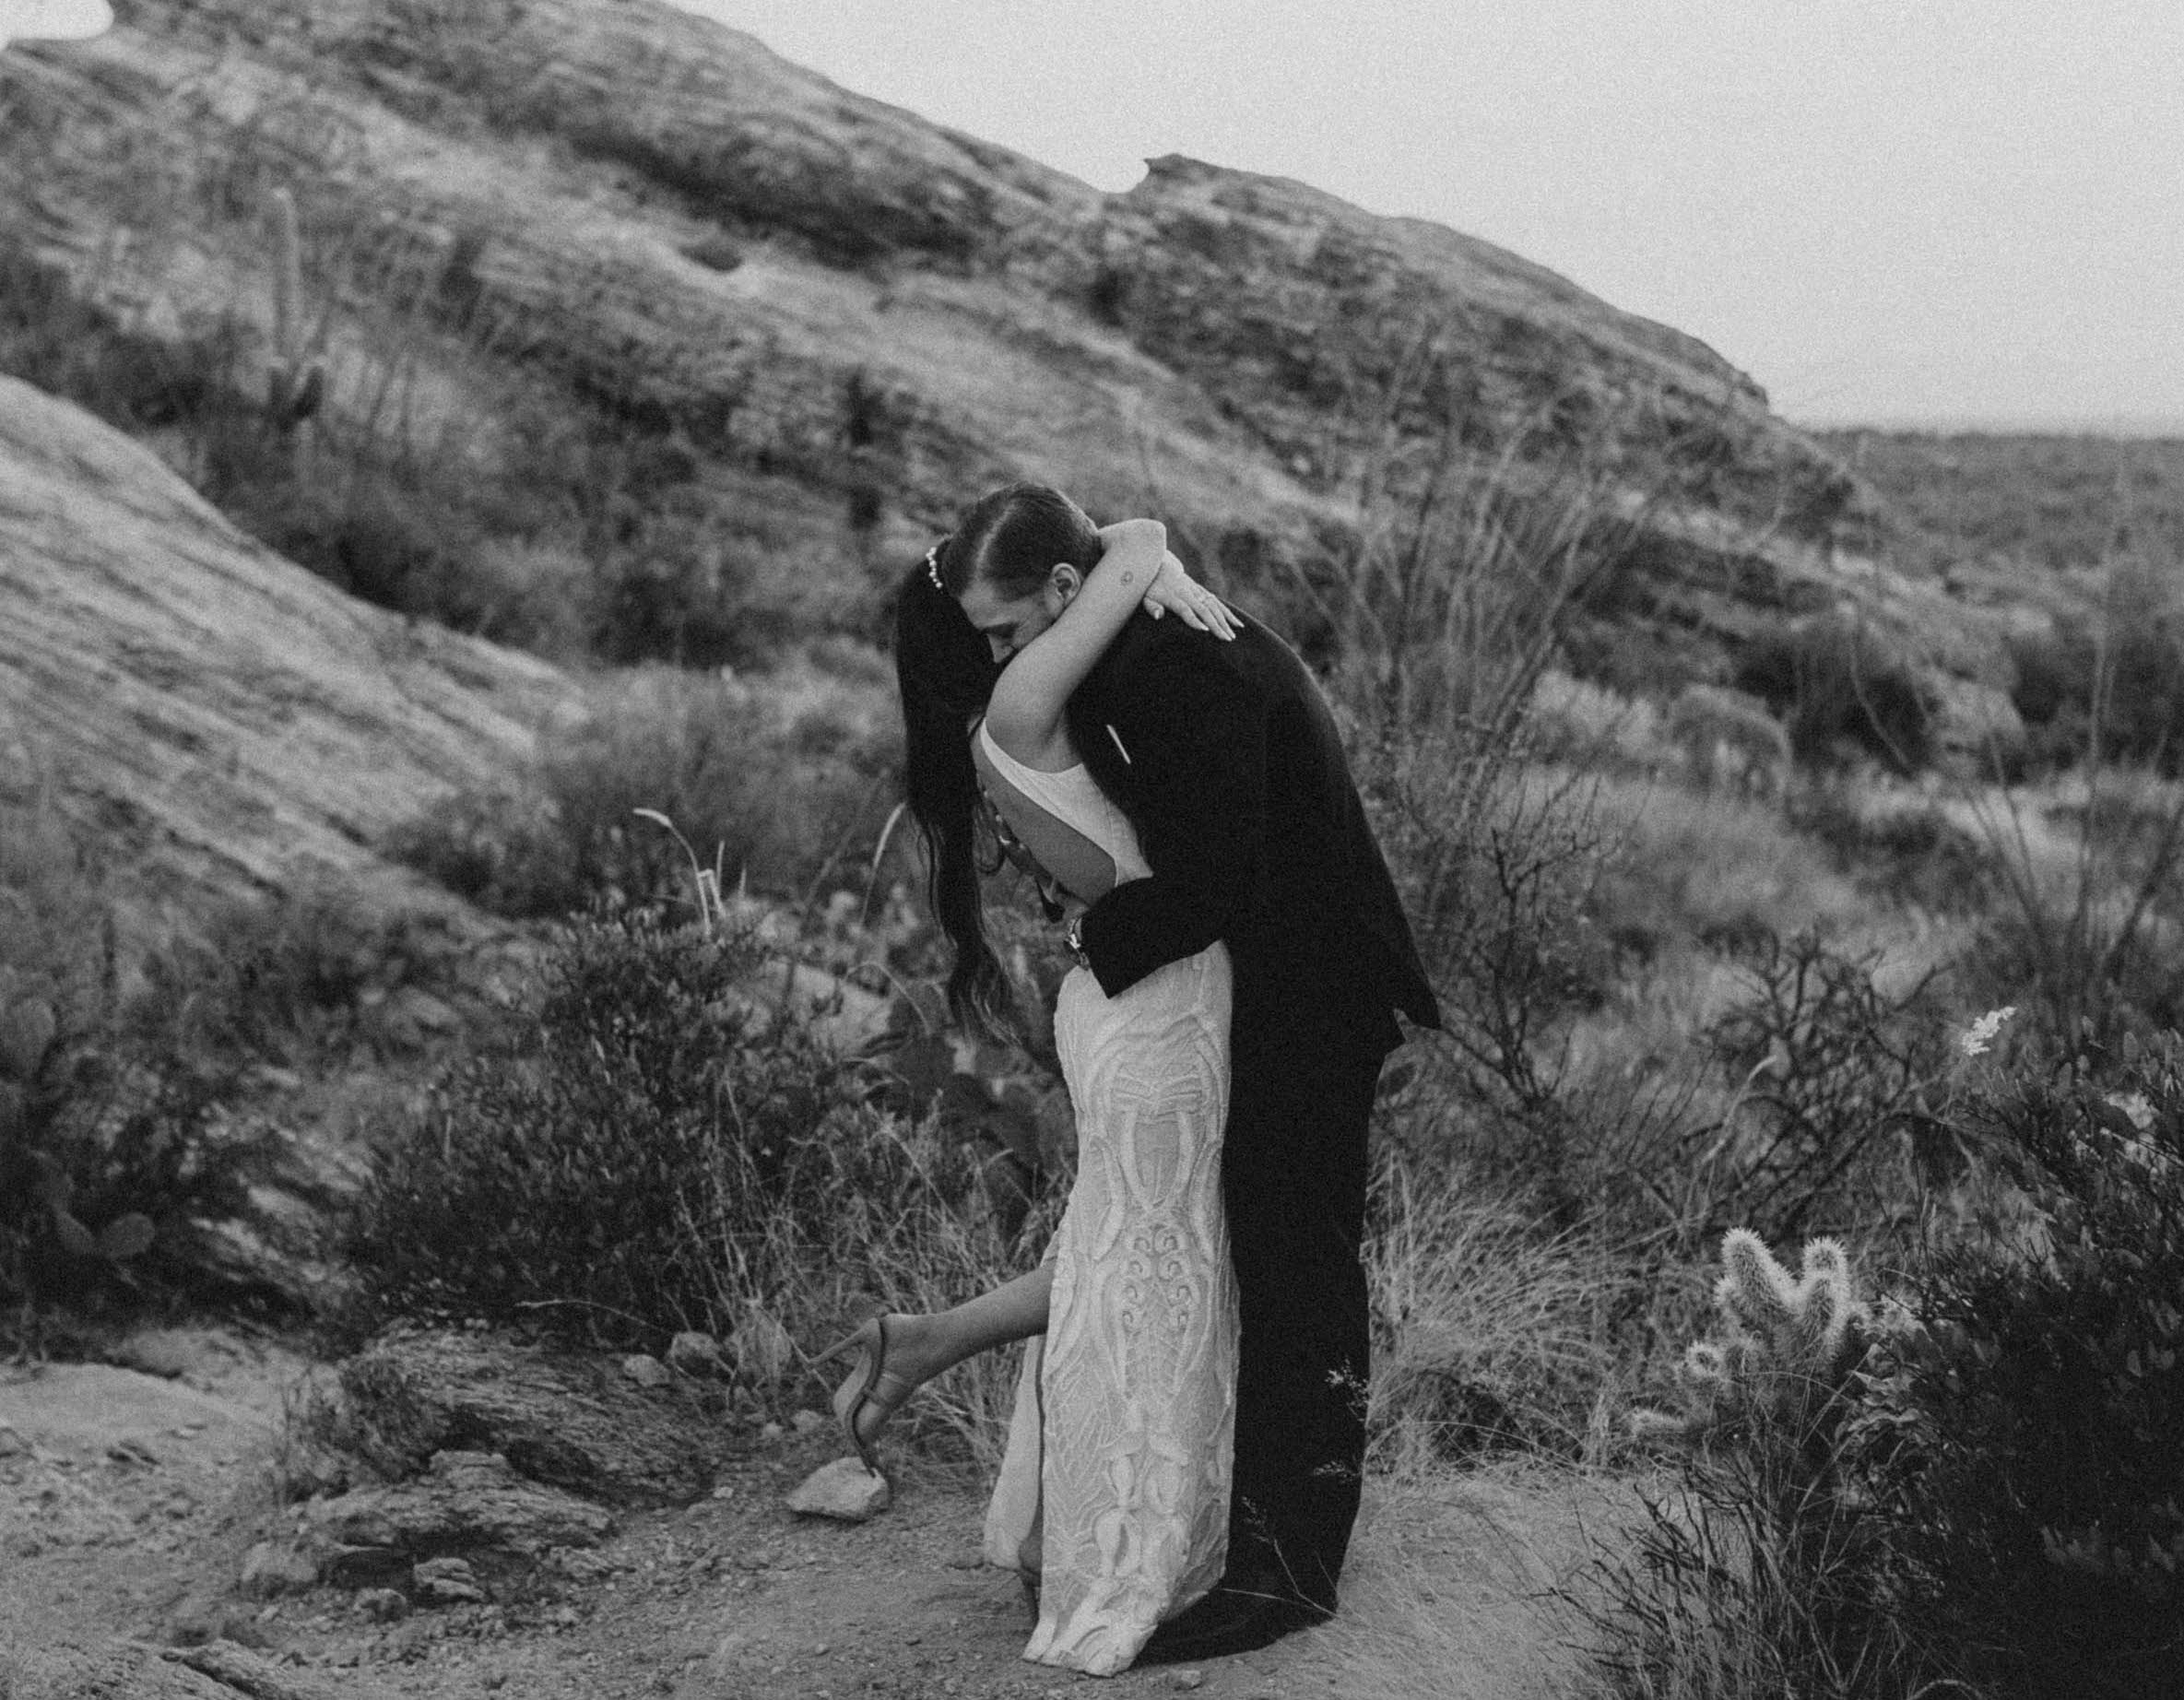 The bride and groom hug in the desert where their elopement is taking place.